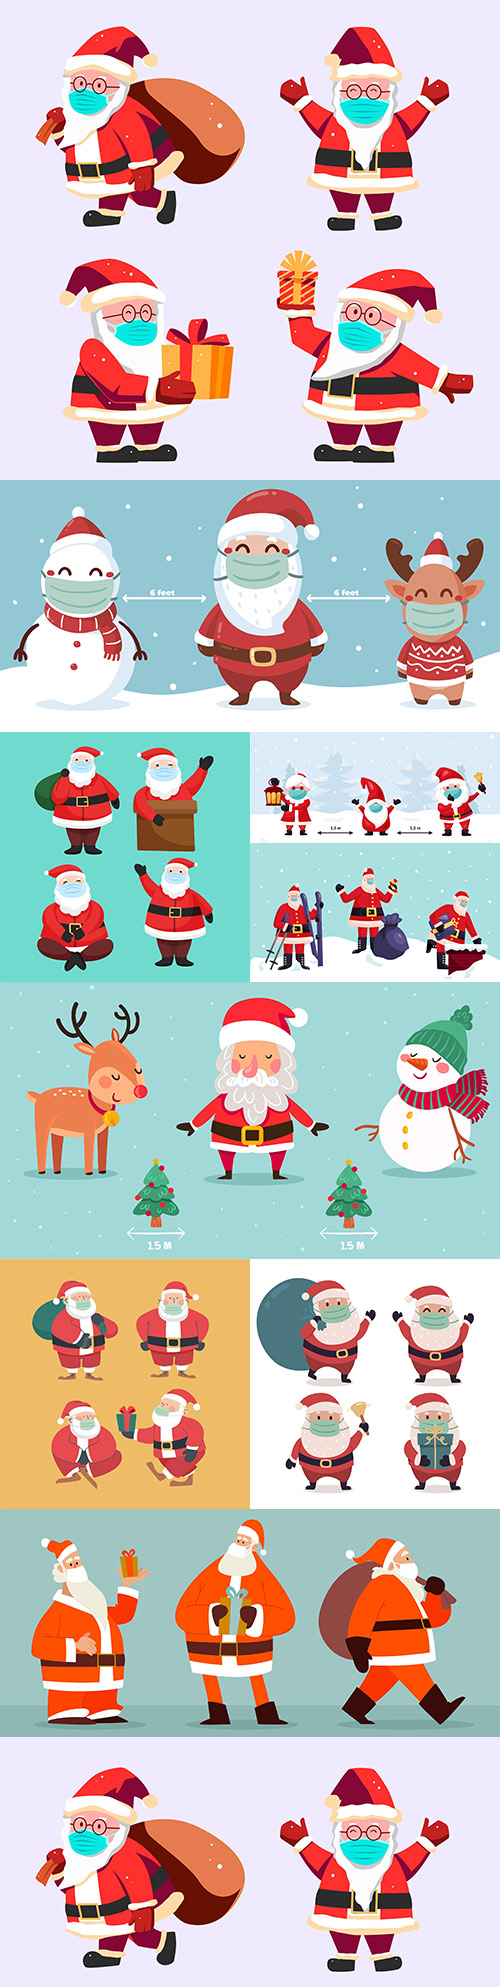 Santa Claus in social distancing mask with Christmas characters
